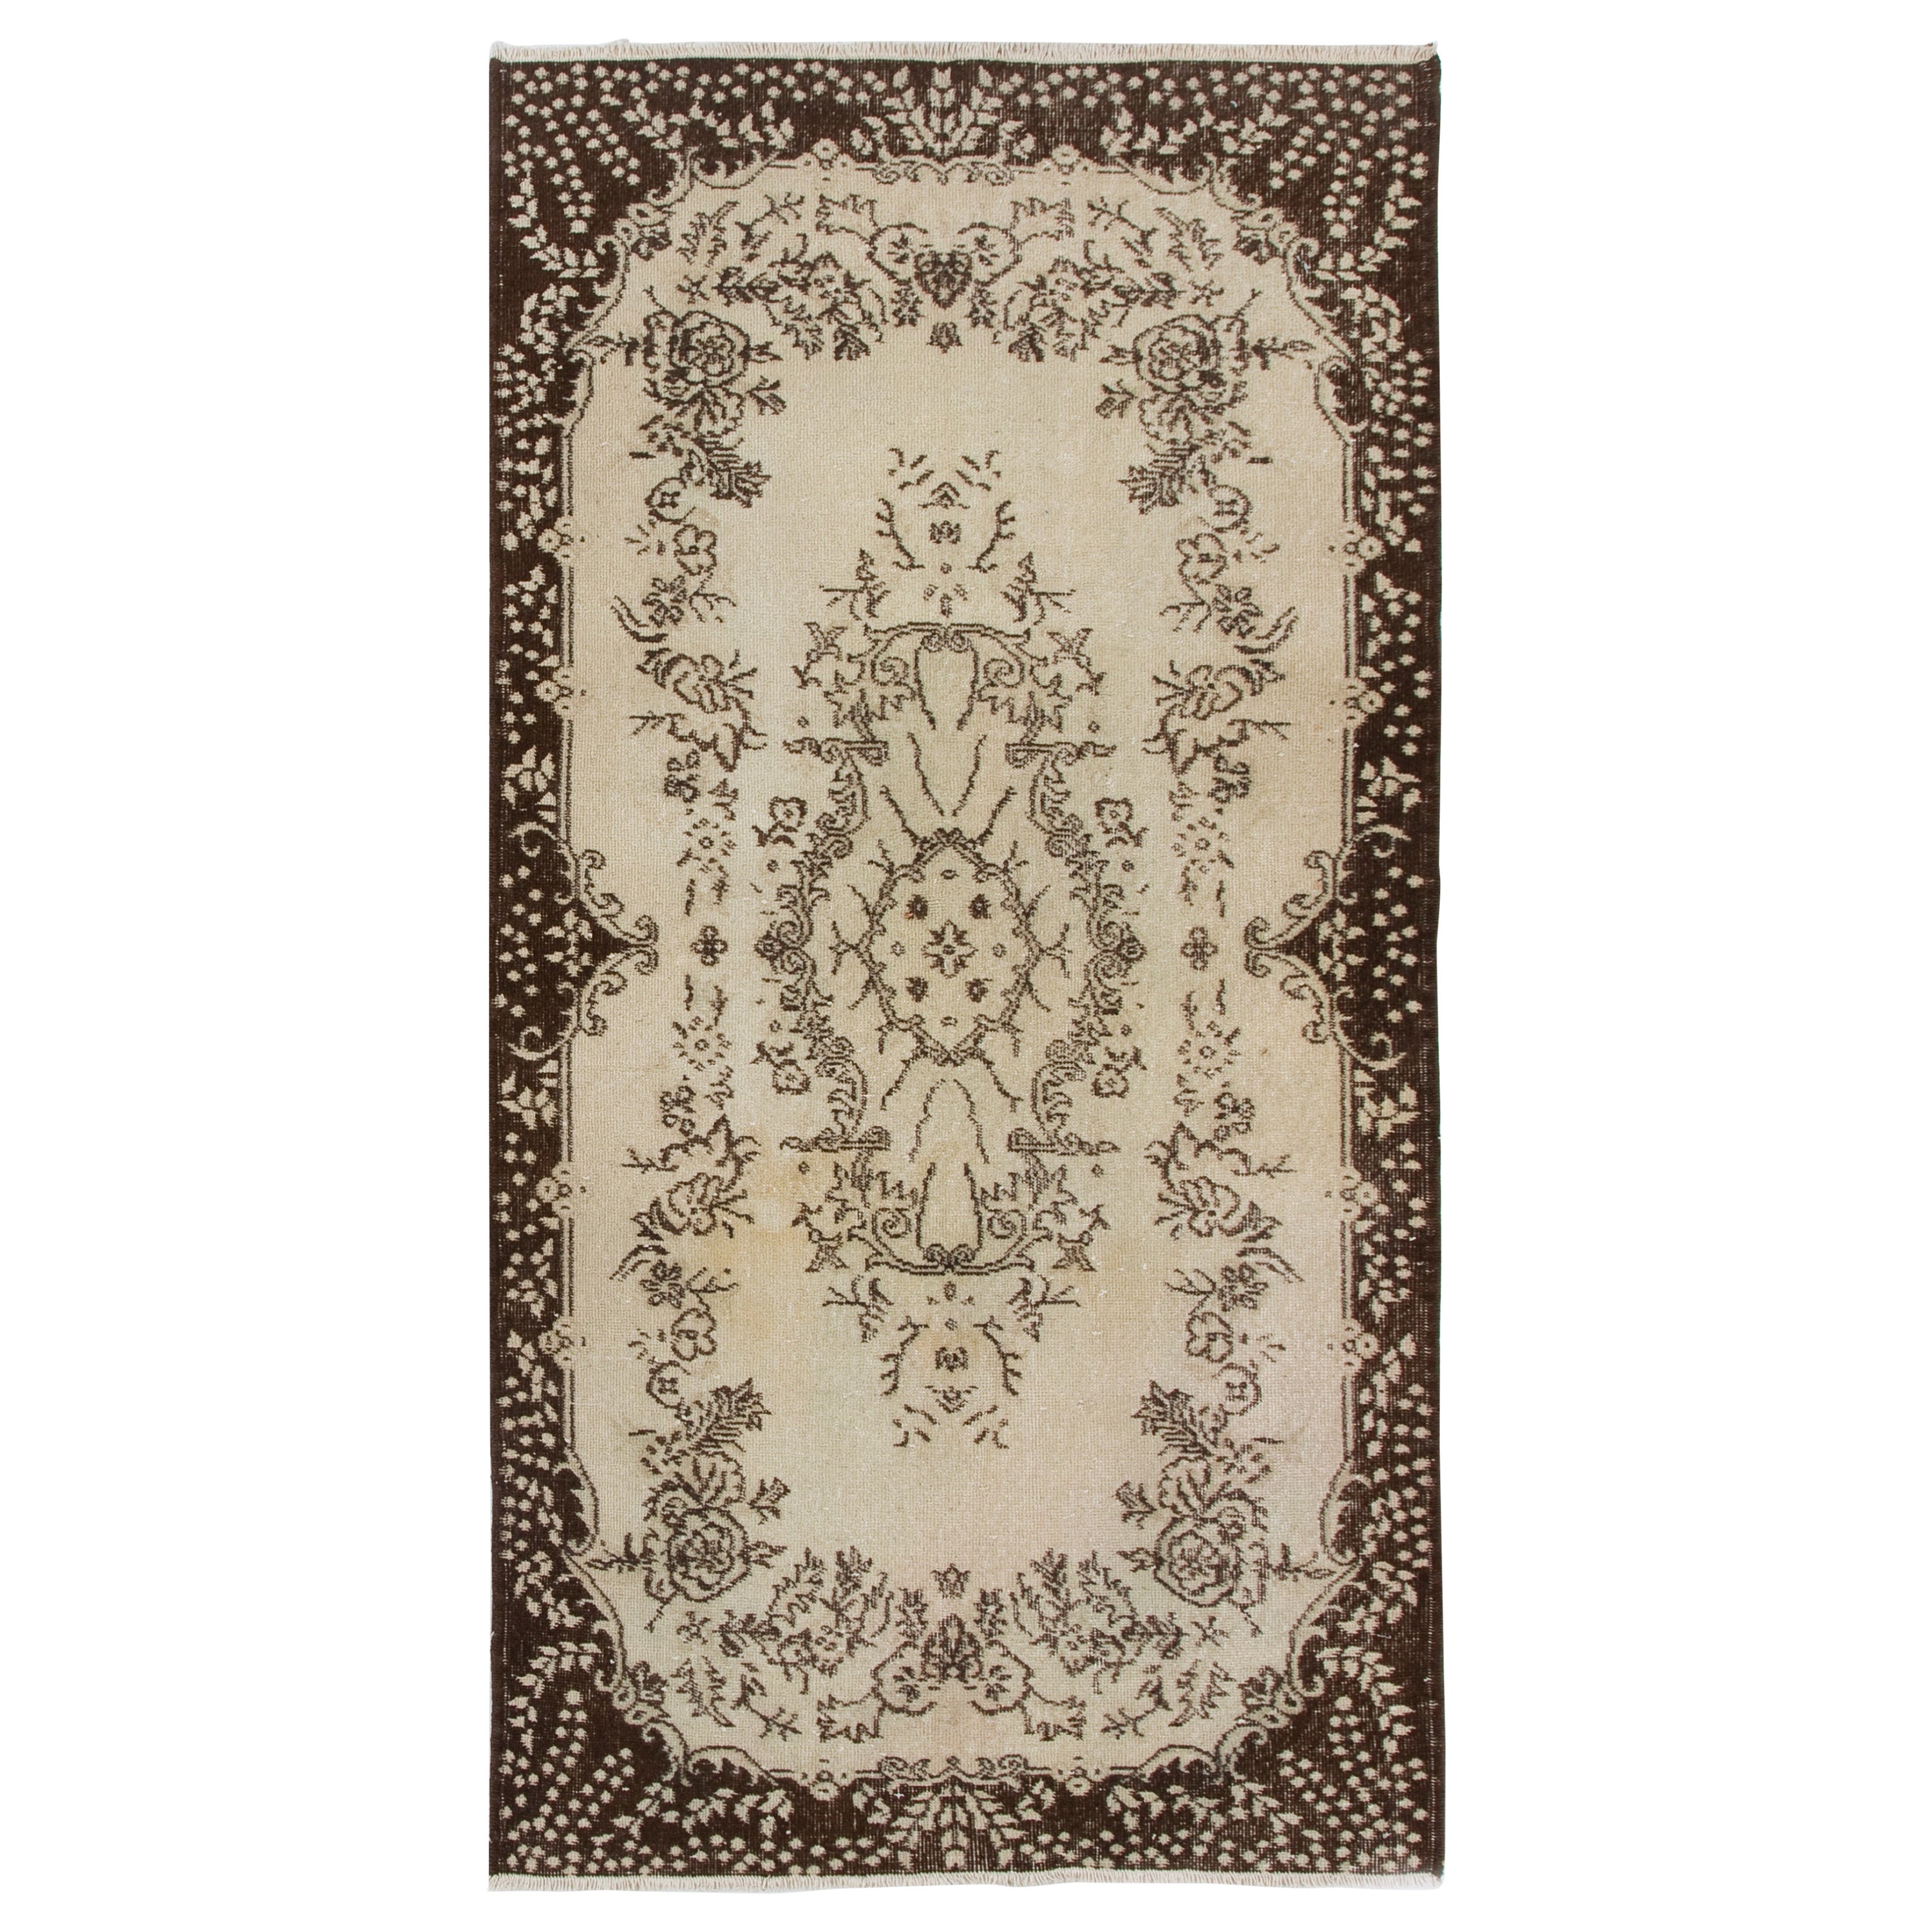 Faded Baroque Design Accent Rug, Vintage Handmade Turkish Small Carpet For Sale